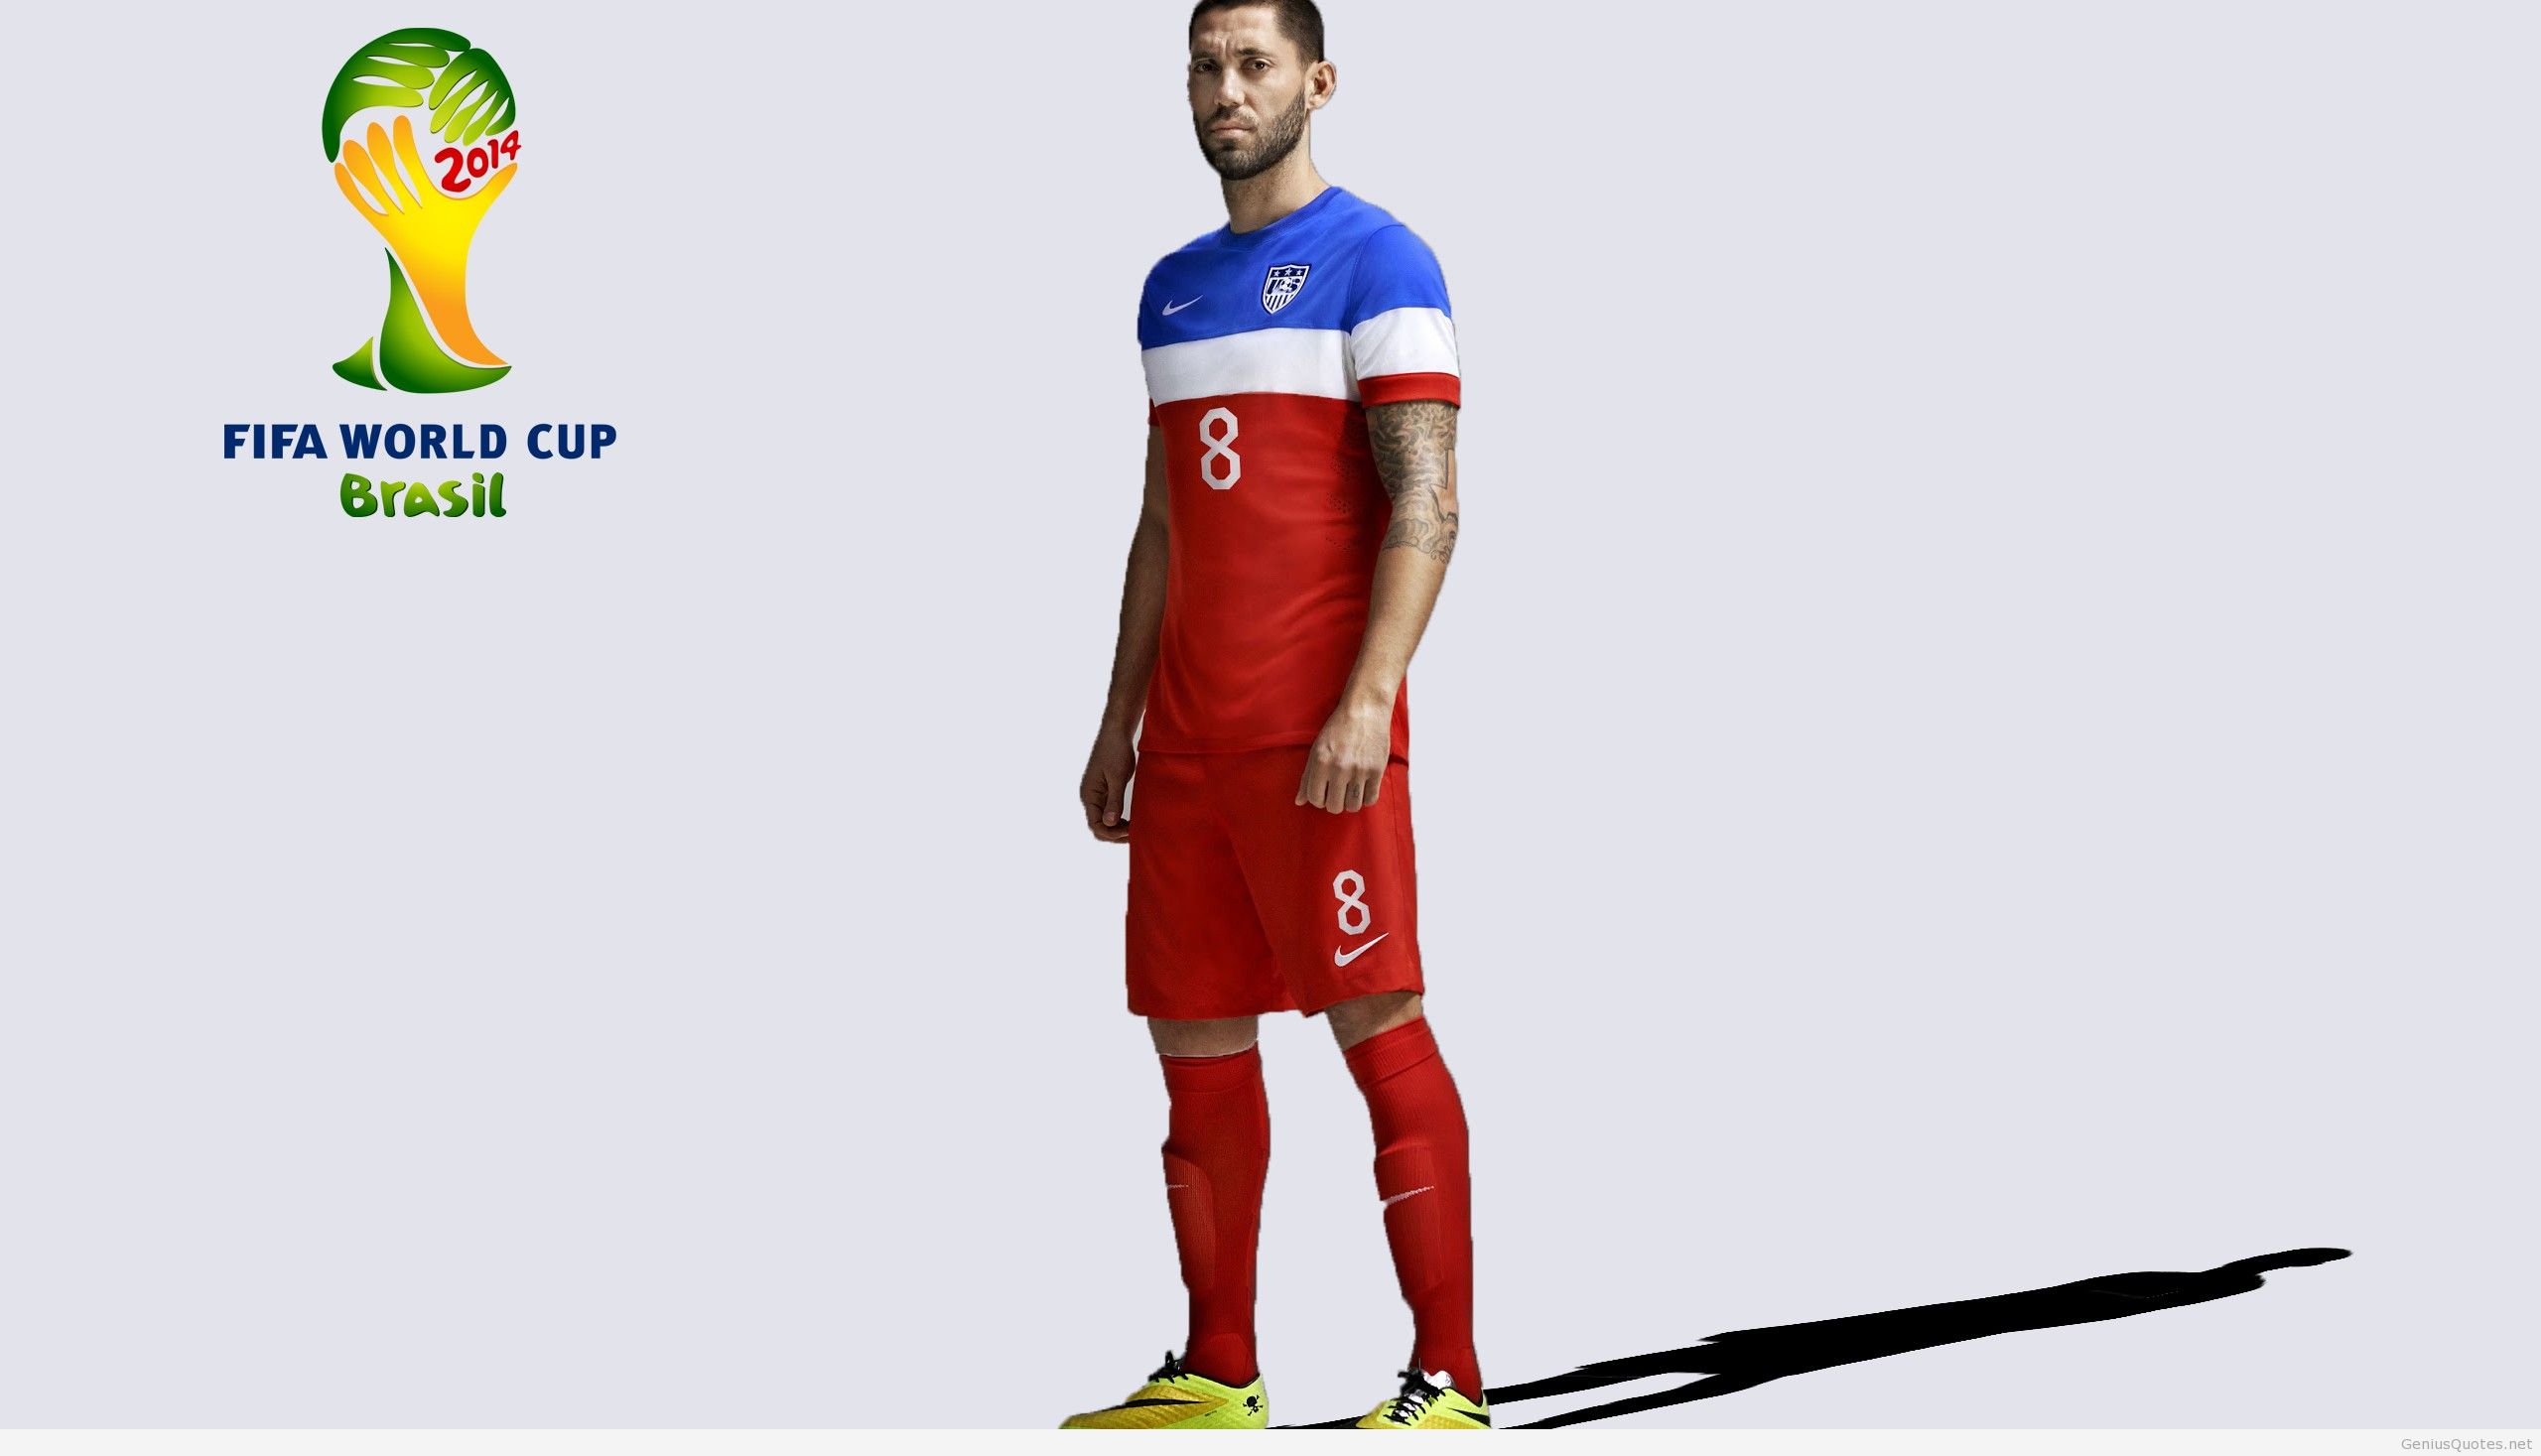 Clint Dempsey in FIFA World Cup 2014 Wallpapers - Football HD ...